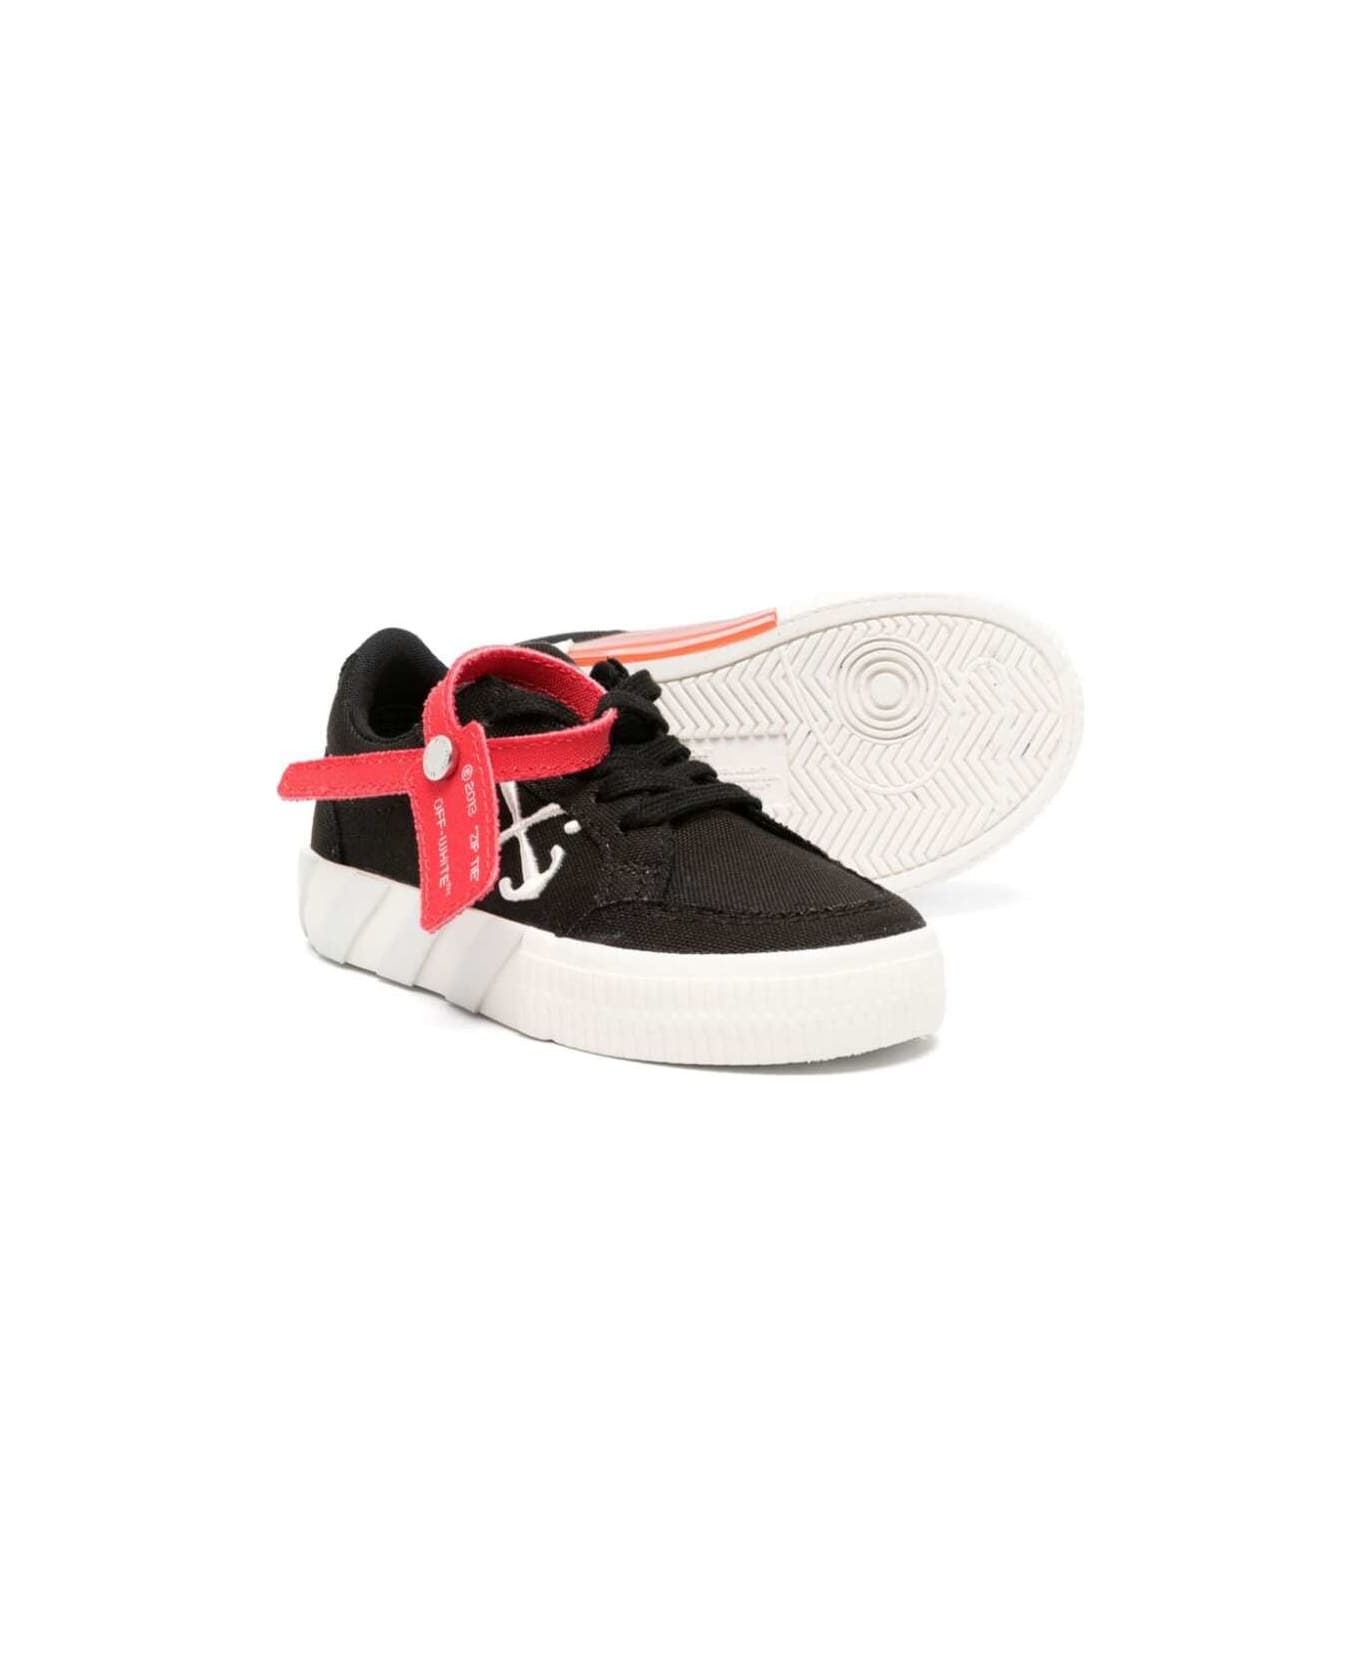 Off-White Black Low Top Sneakers In Cotton Girl - Black